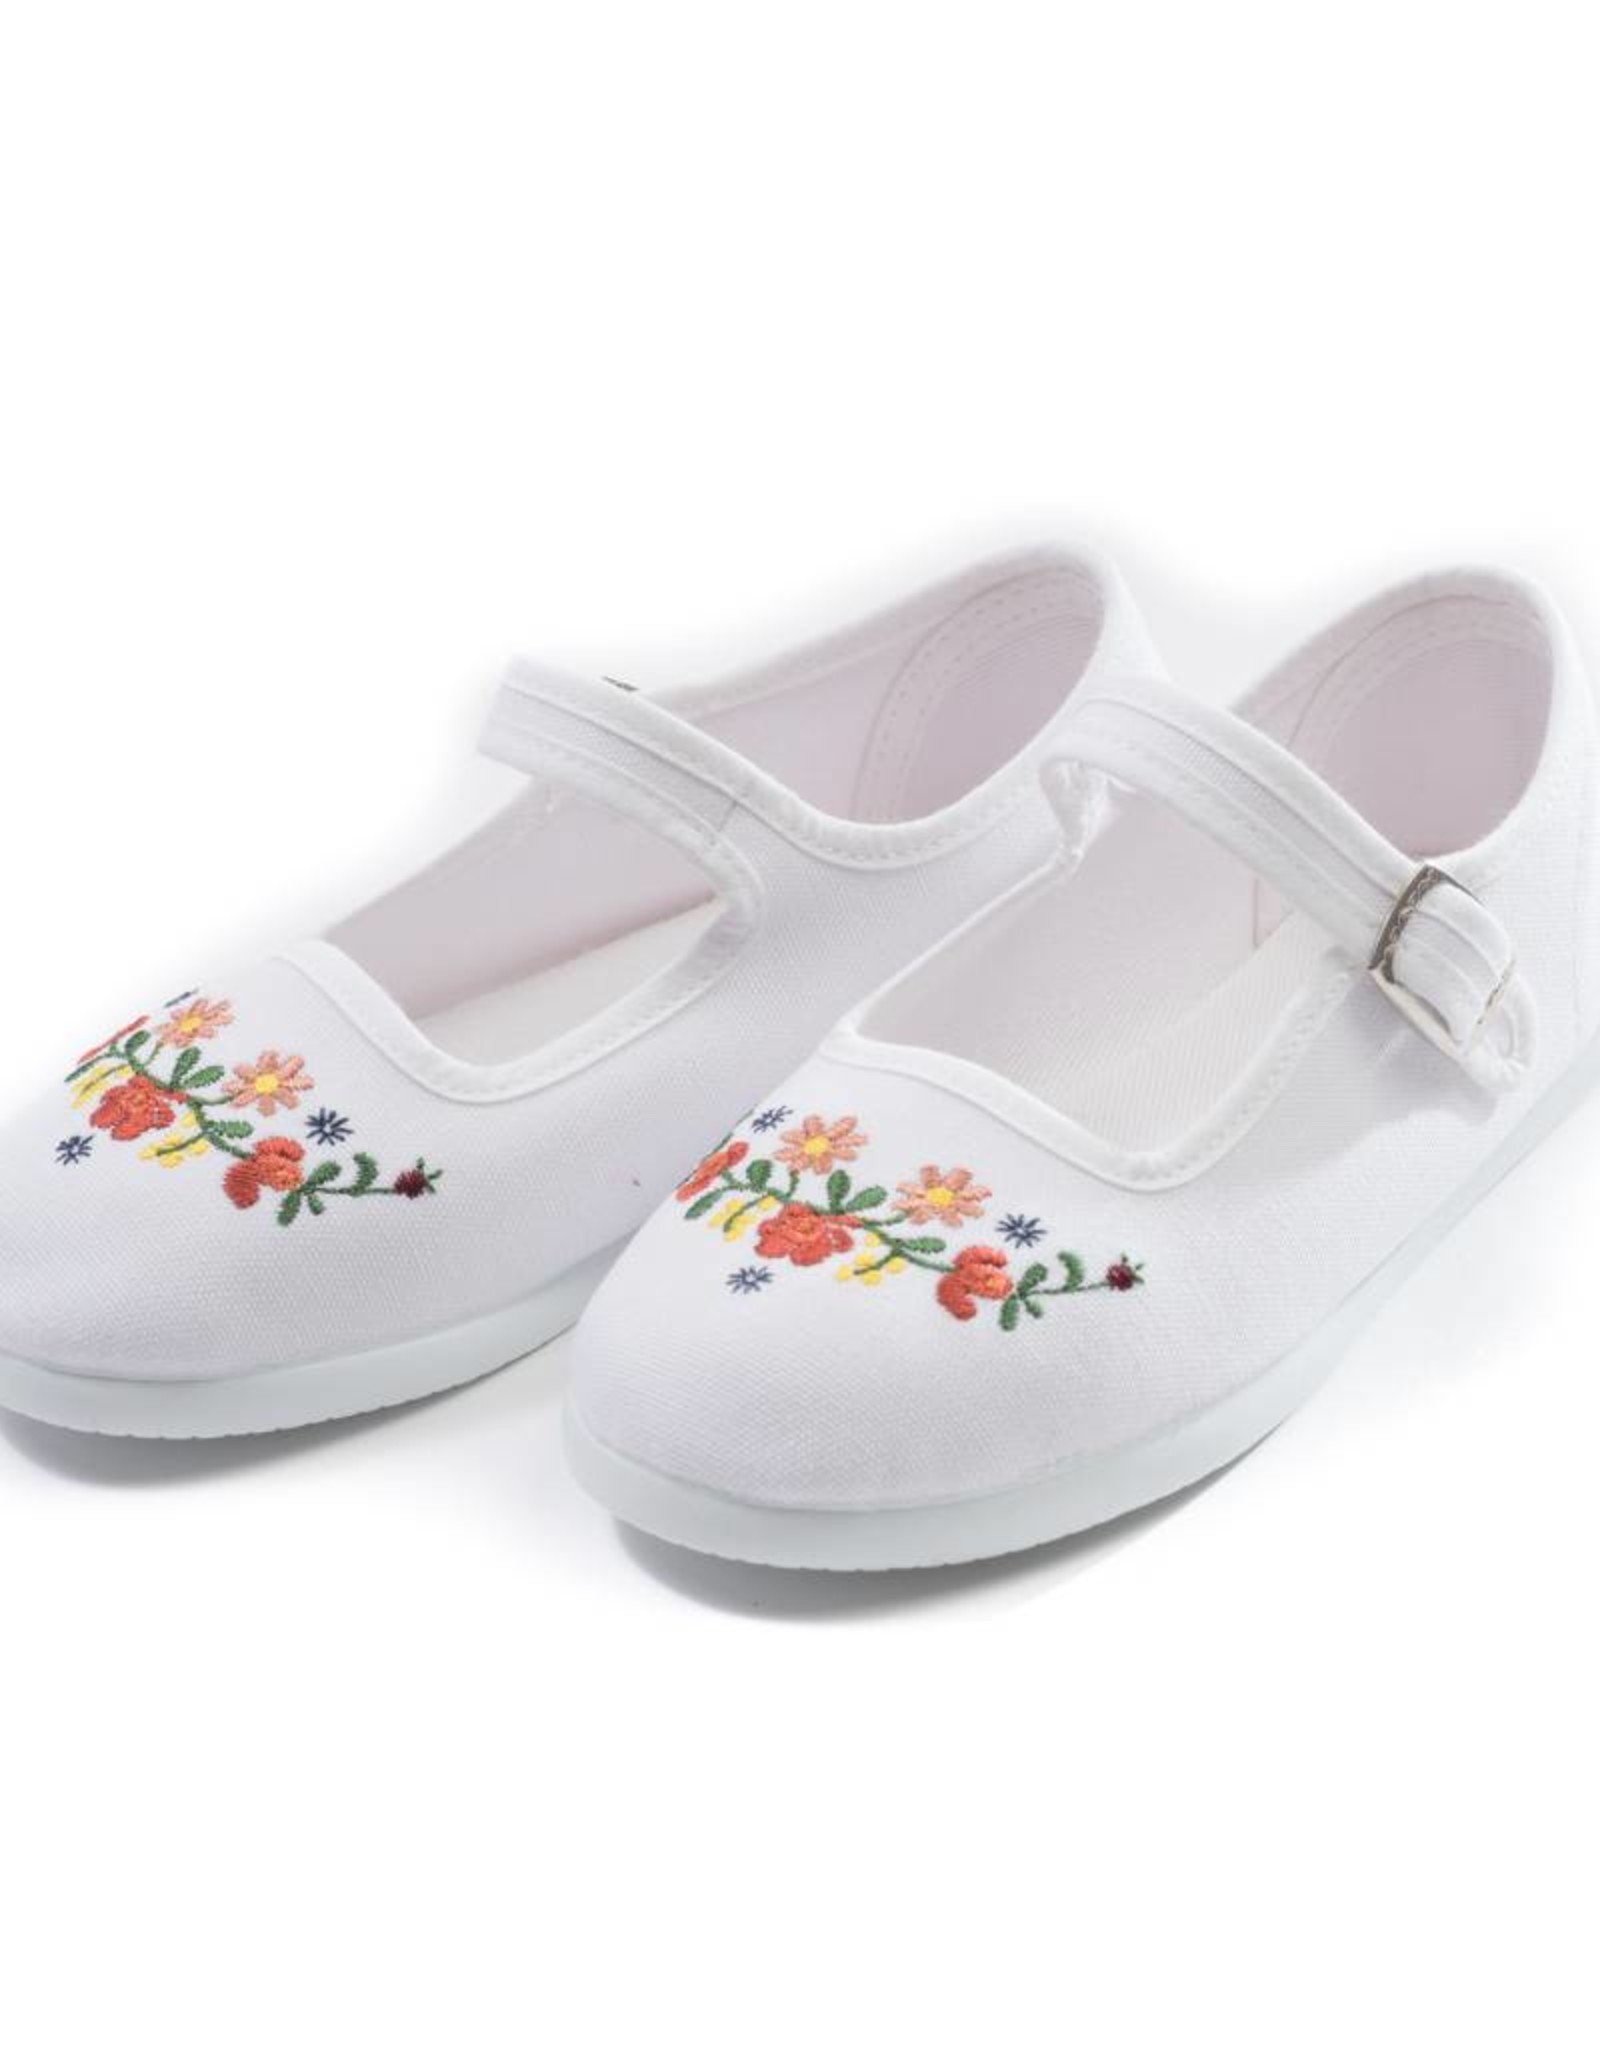 Bonton Embroidered baby shoes